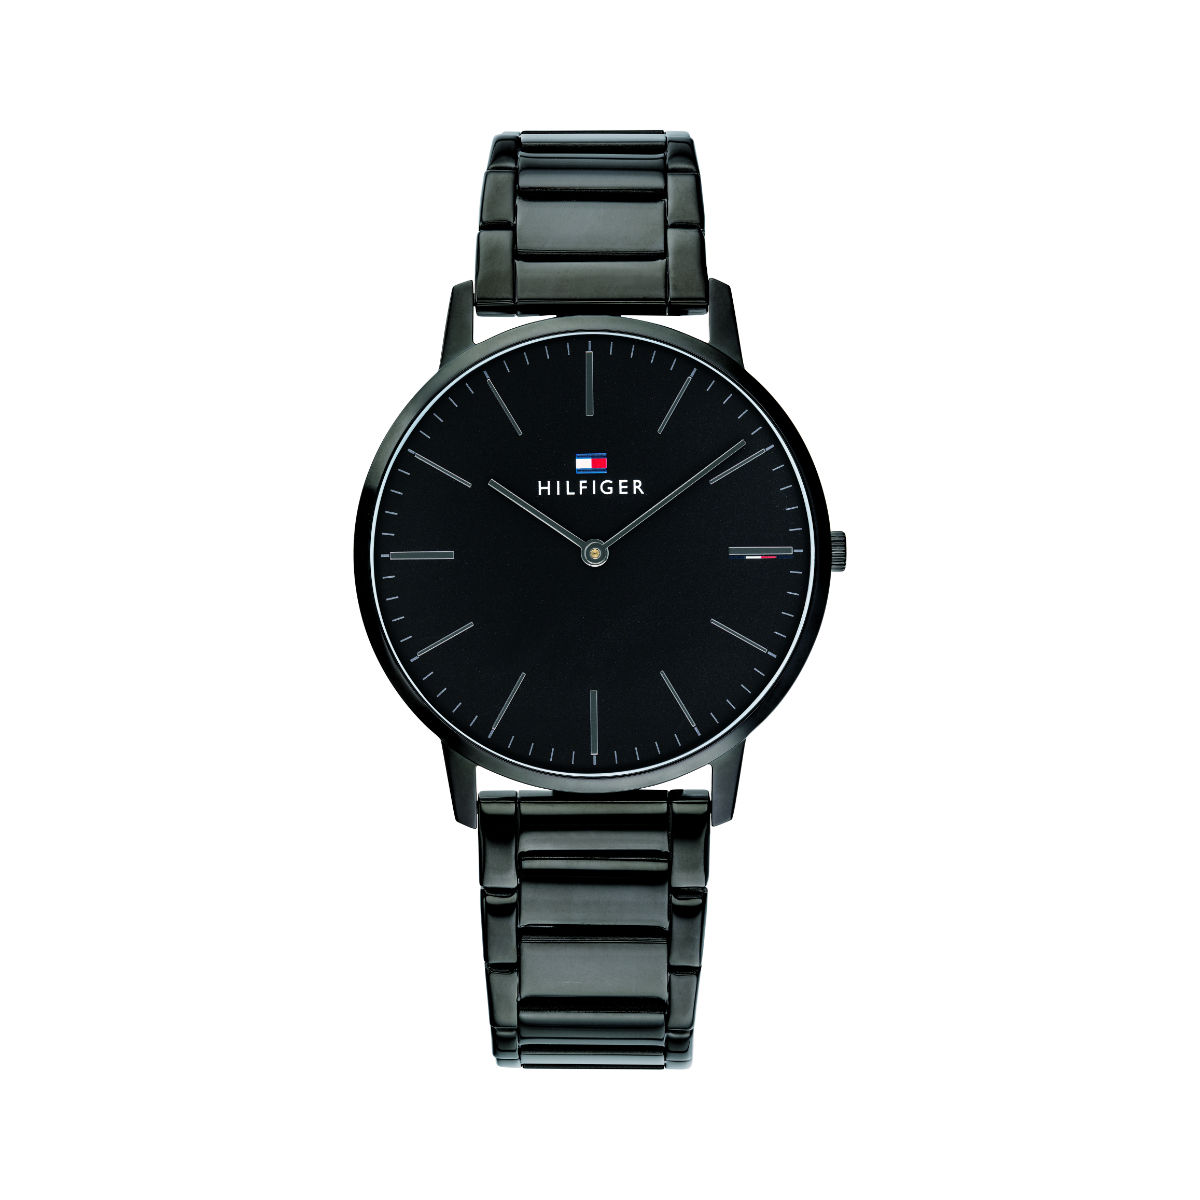 tommy hilfiger watches for men price